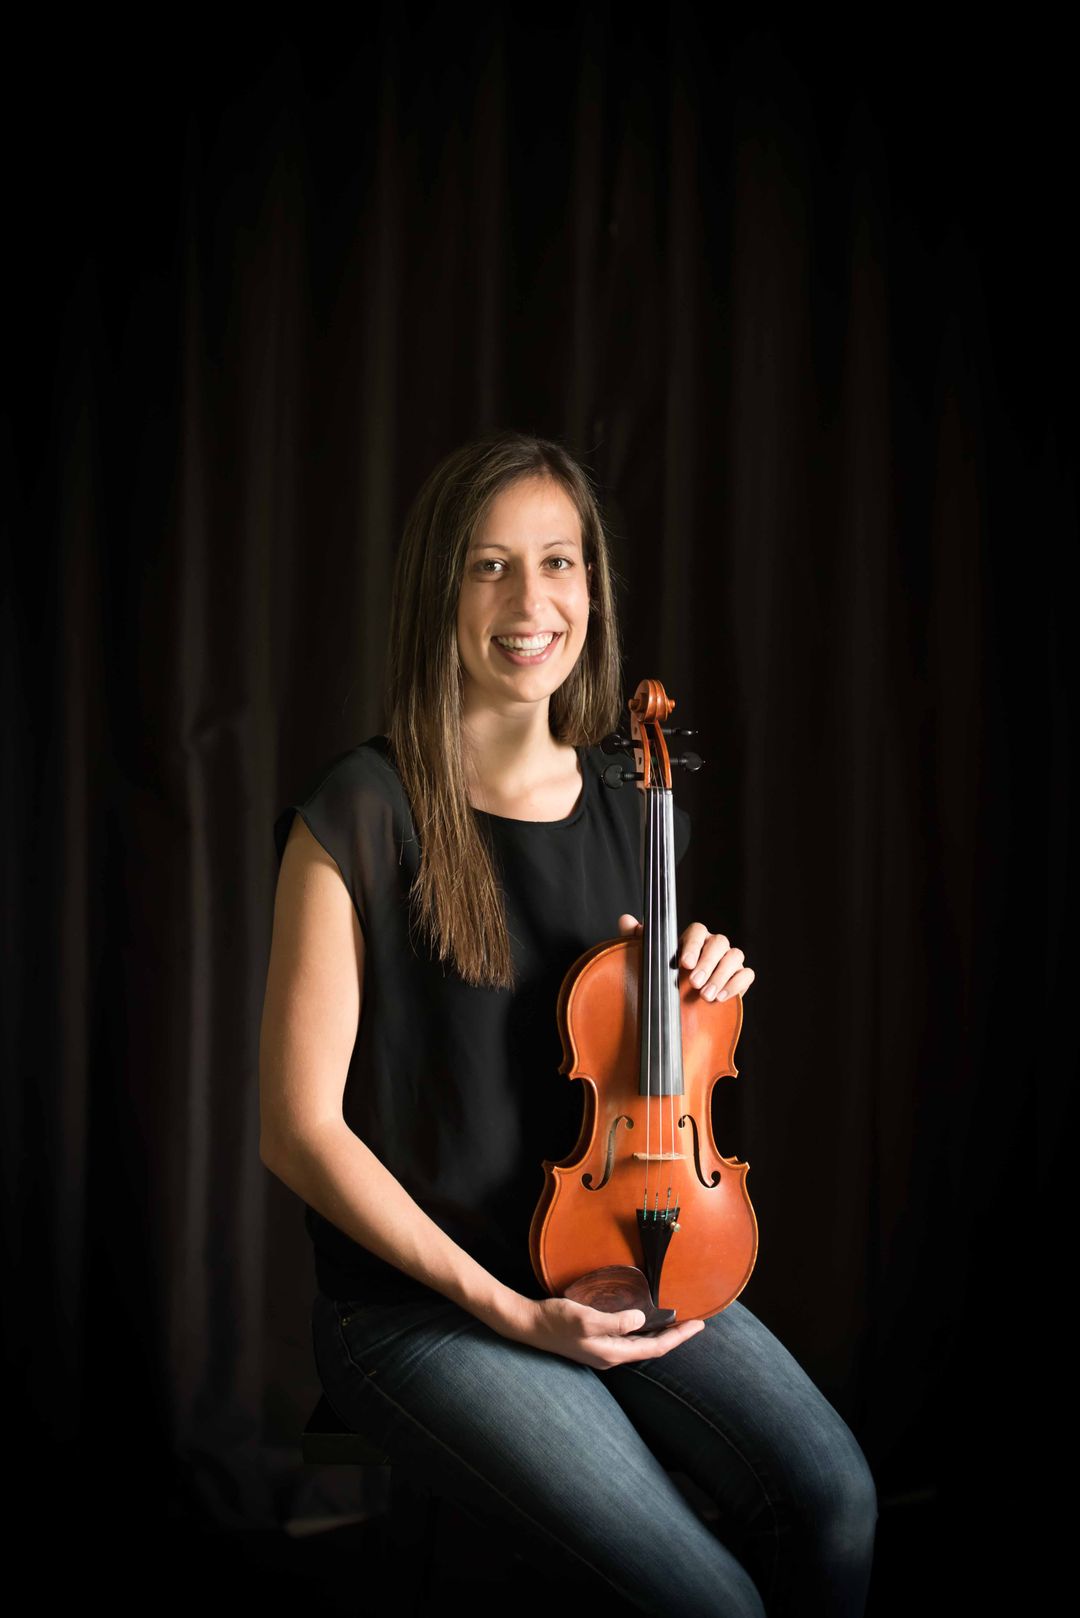 Professional violinist and pianist Laila holding violin